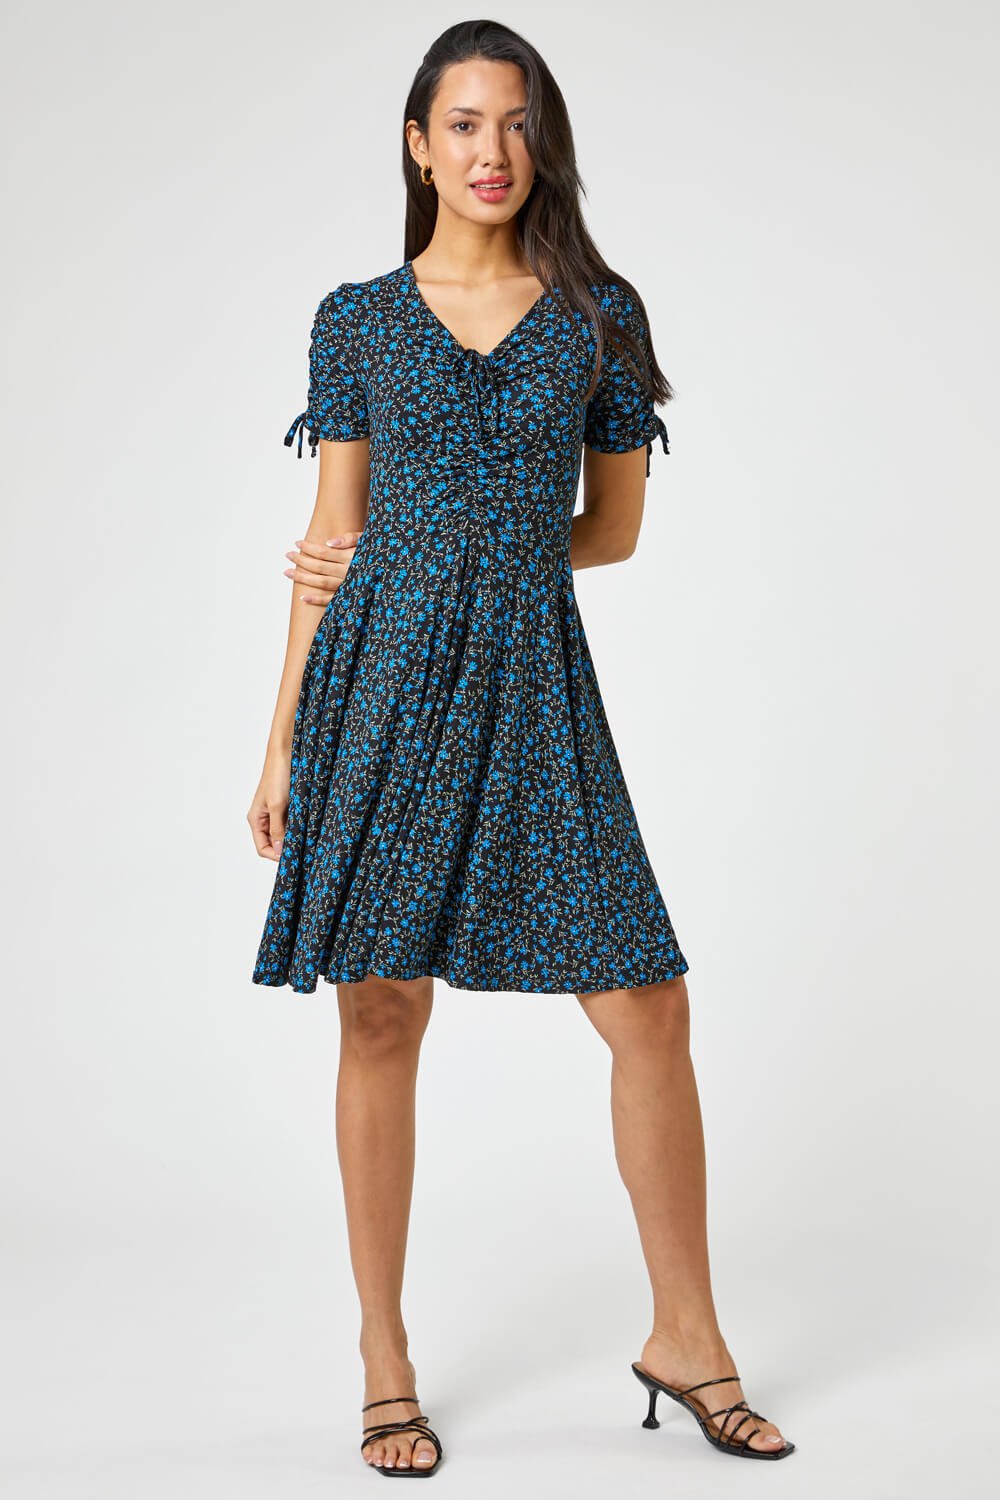 Blue Ditsy Floral Print Ruched Tea Dress, Image 3 of 4